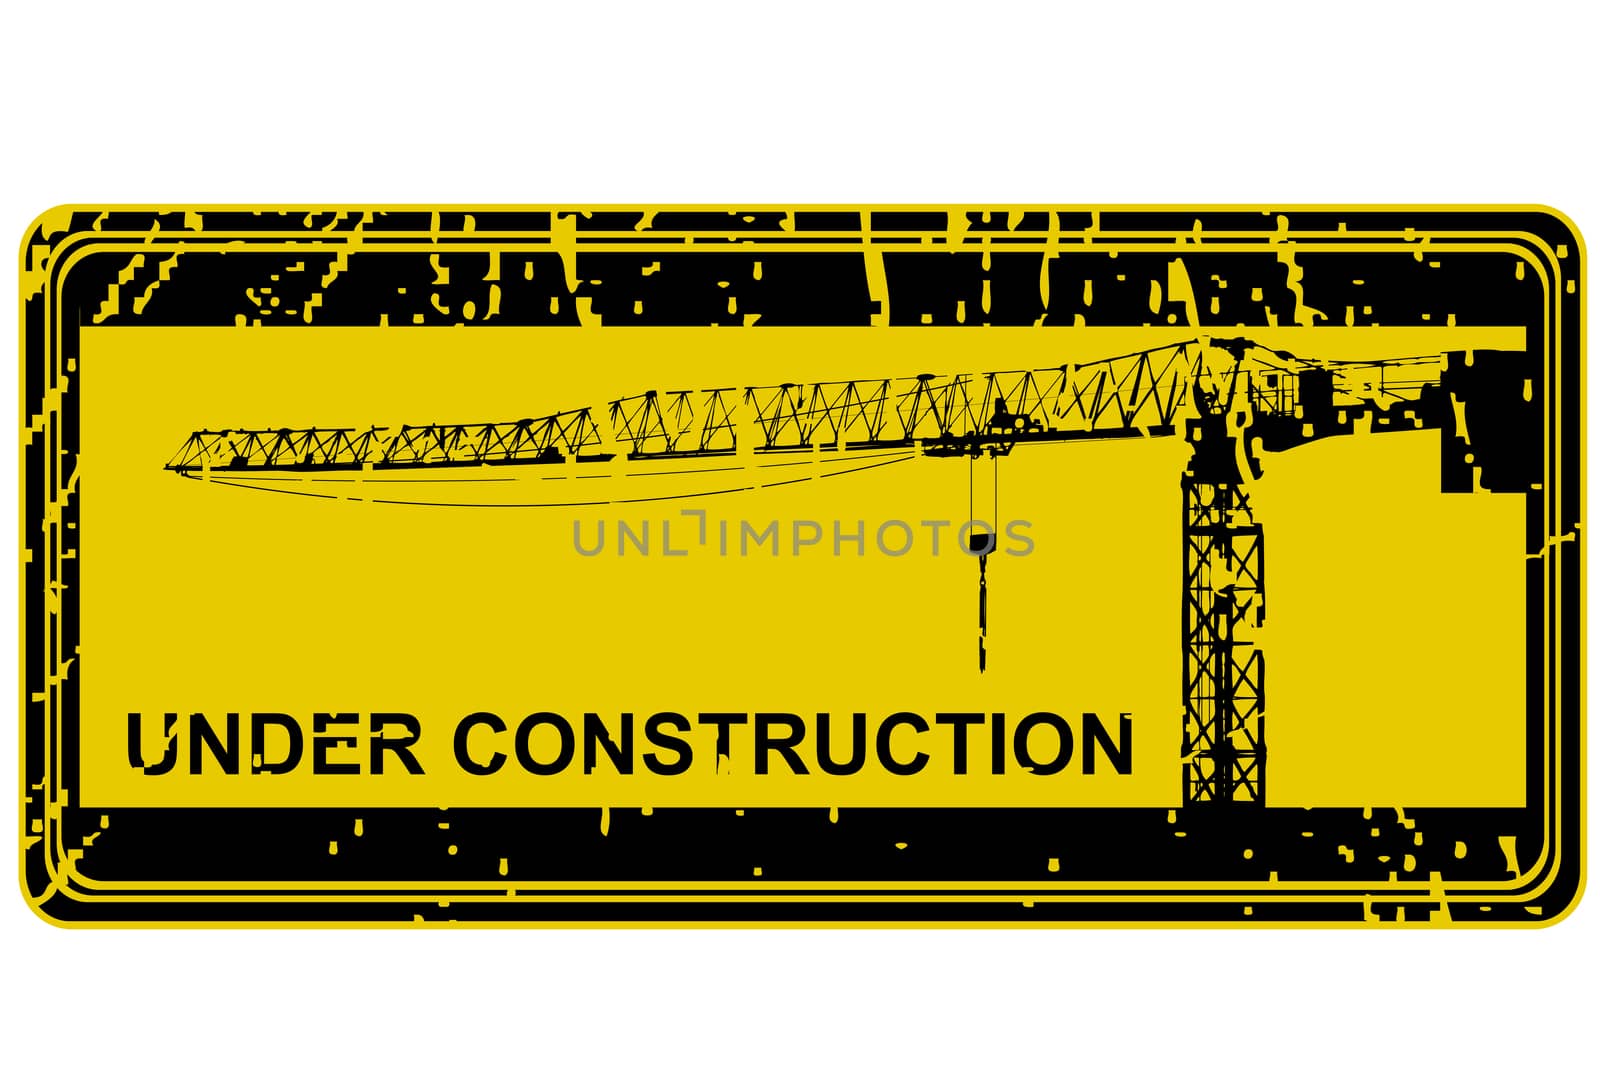 Under construction stamp with crane silhouette